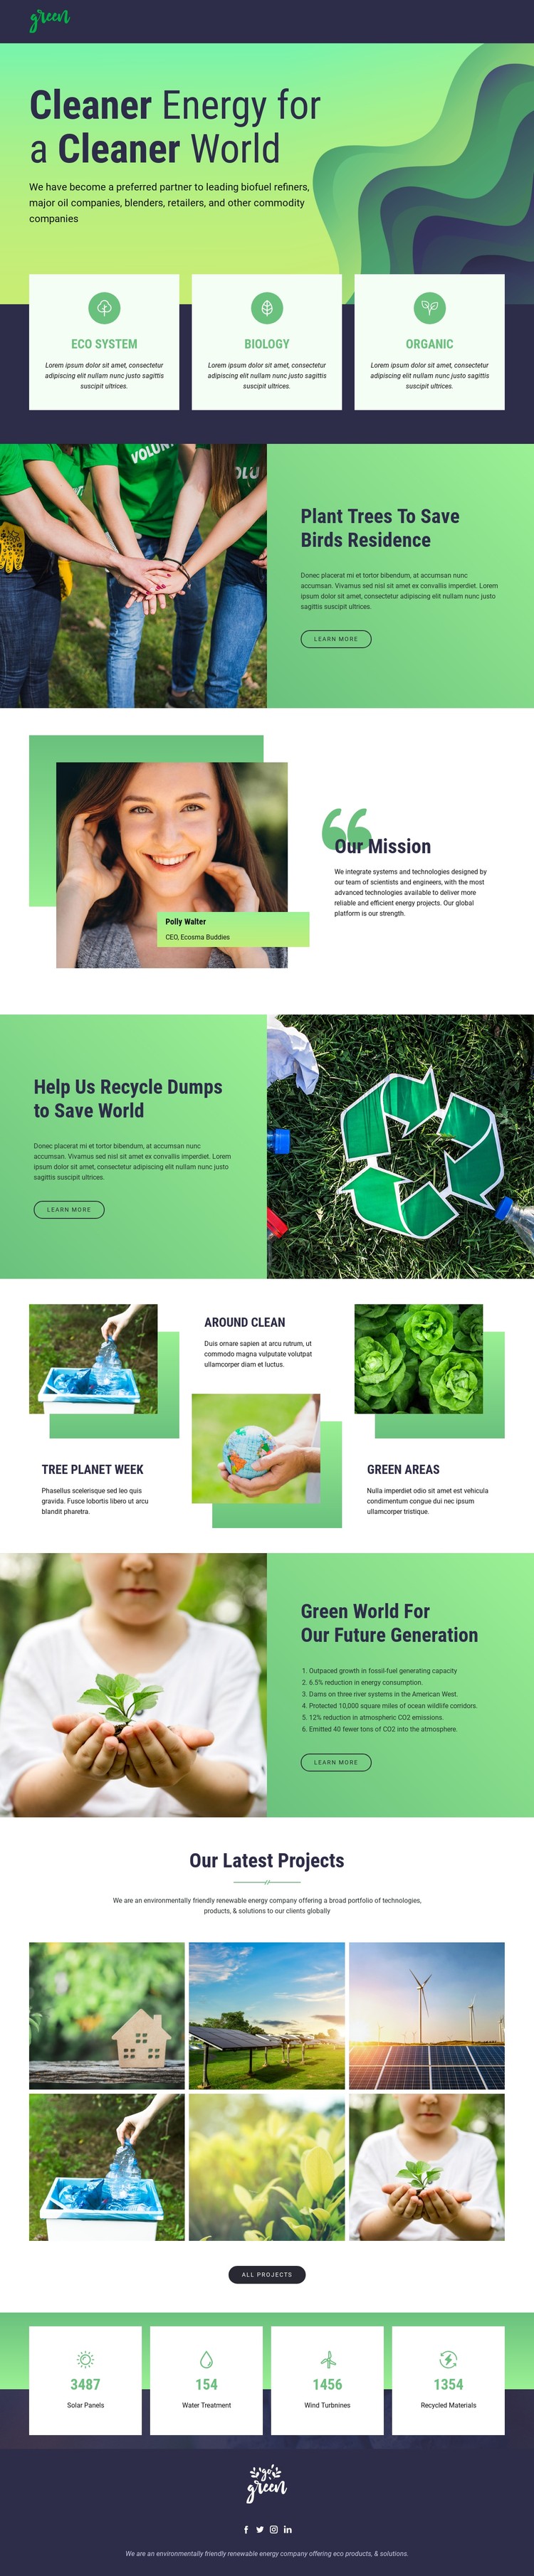 Clean energy to save nature CSS Template